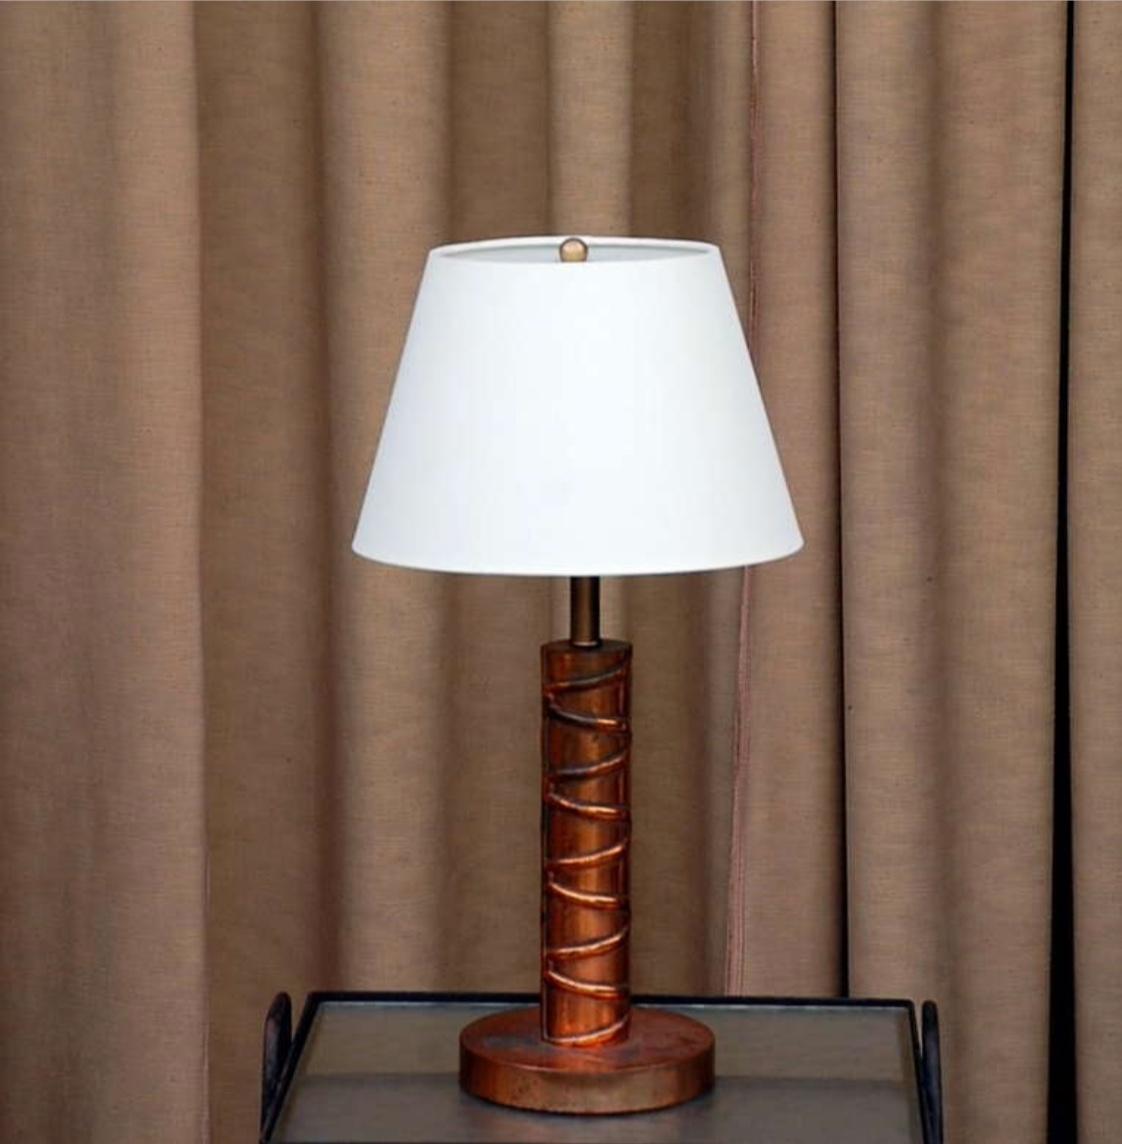 Heavy copper table lamp with custom linen shade.